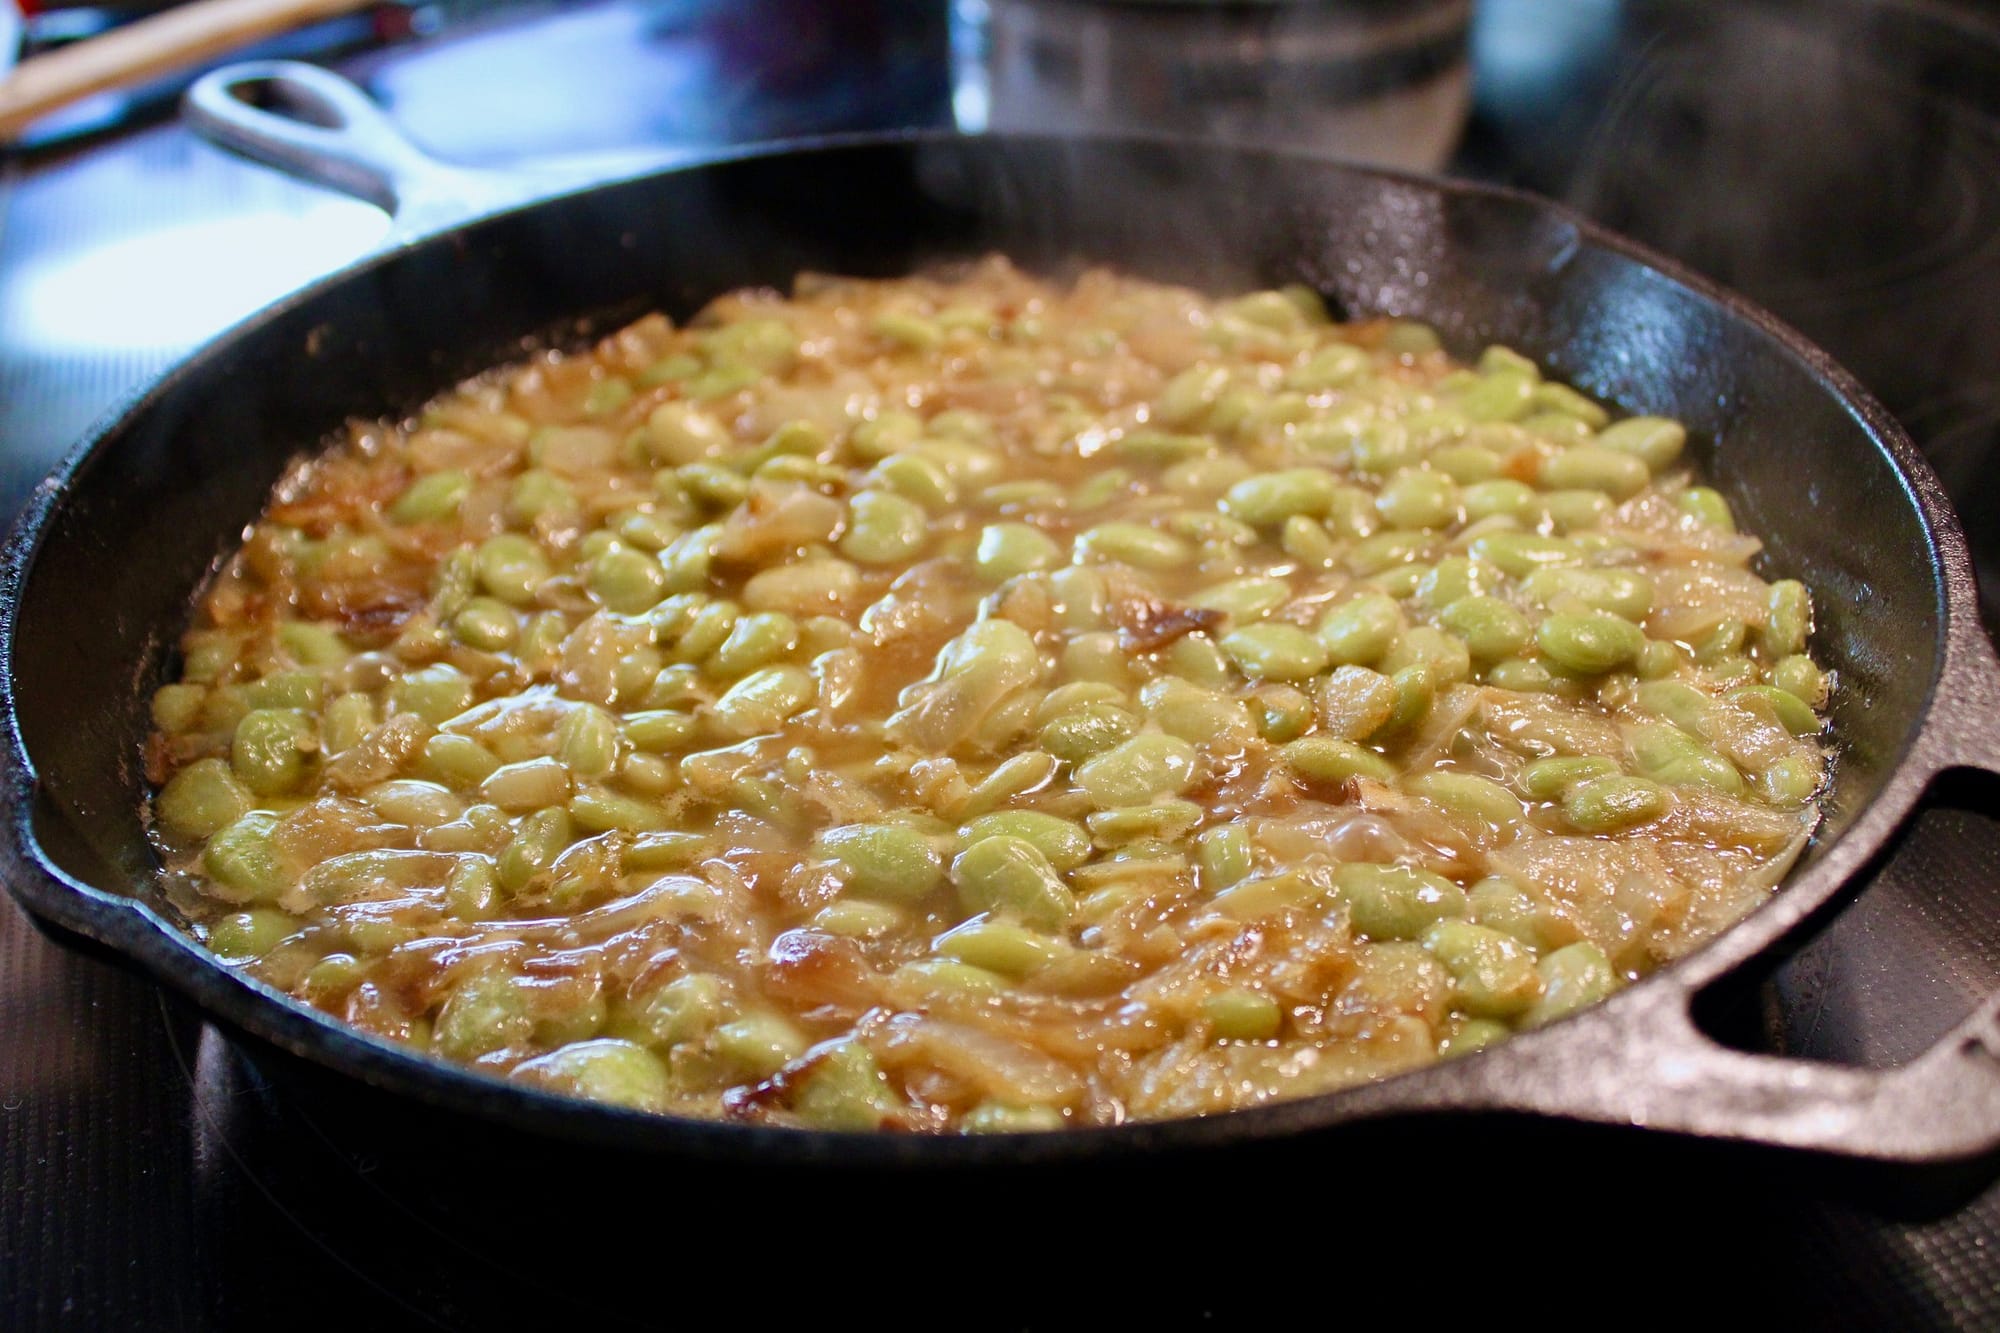 Beans cooking in a skillet.